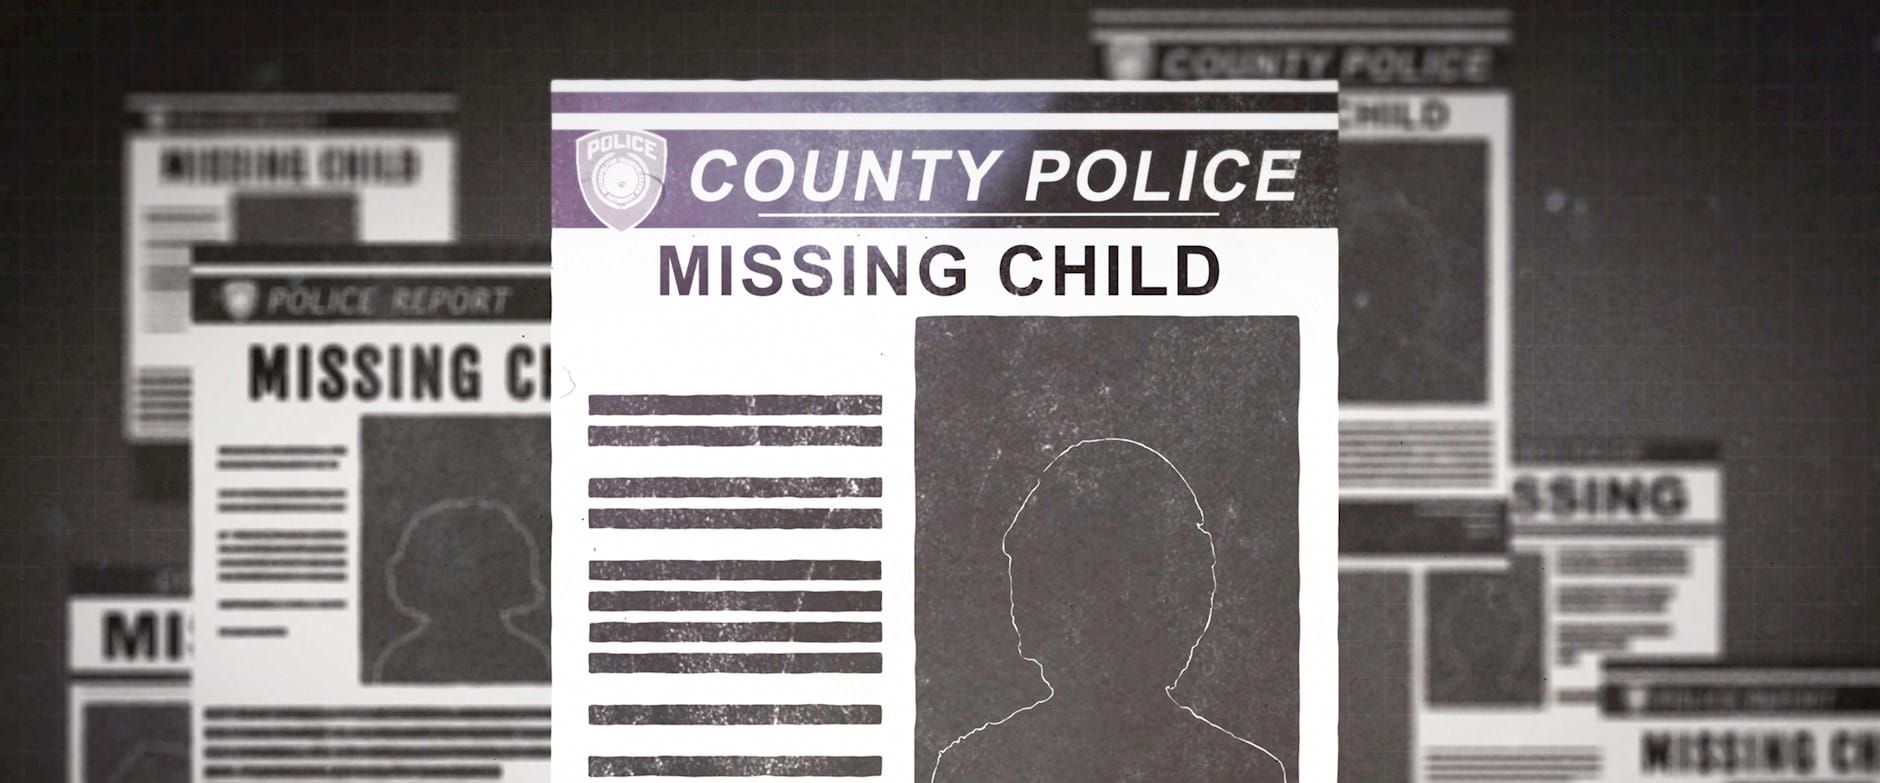 Posters for missing children